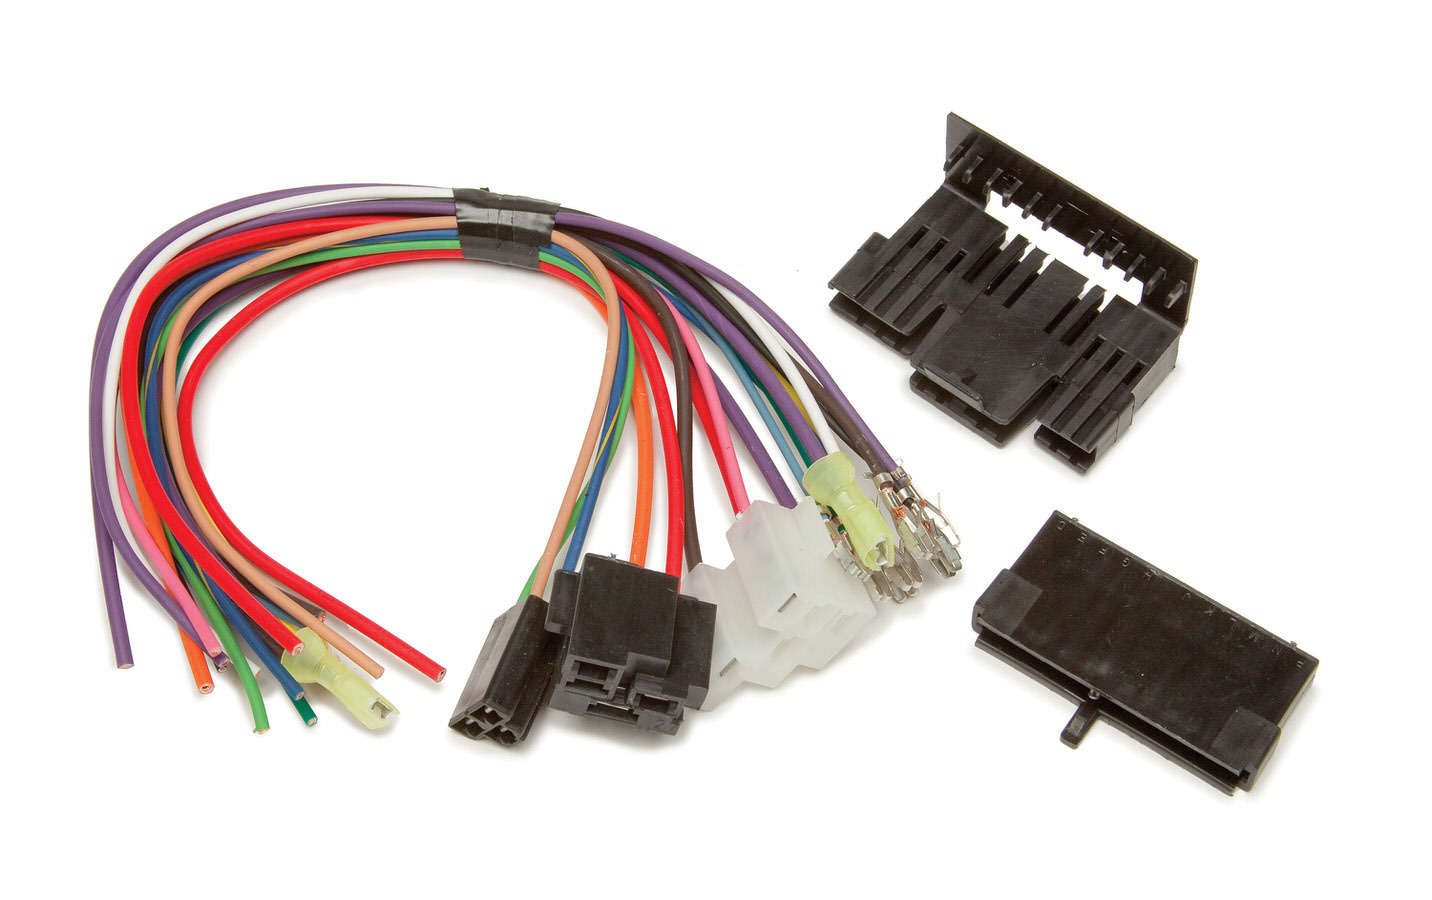 Gm Steering Column and Dimmer Swch.Pigtail Kit - 30805